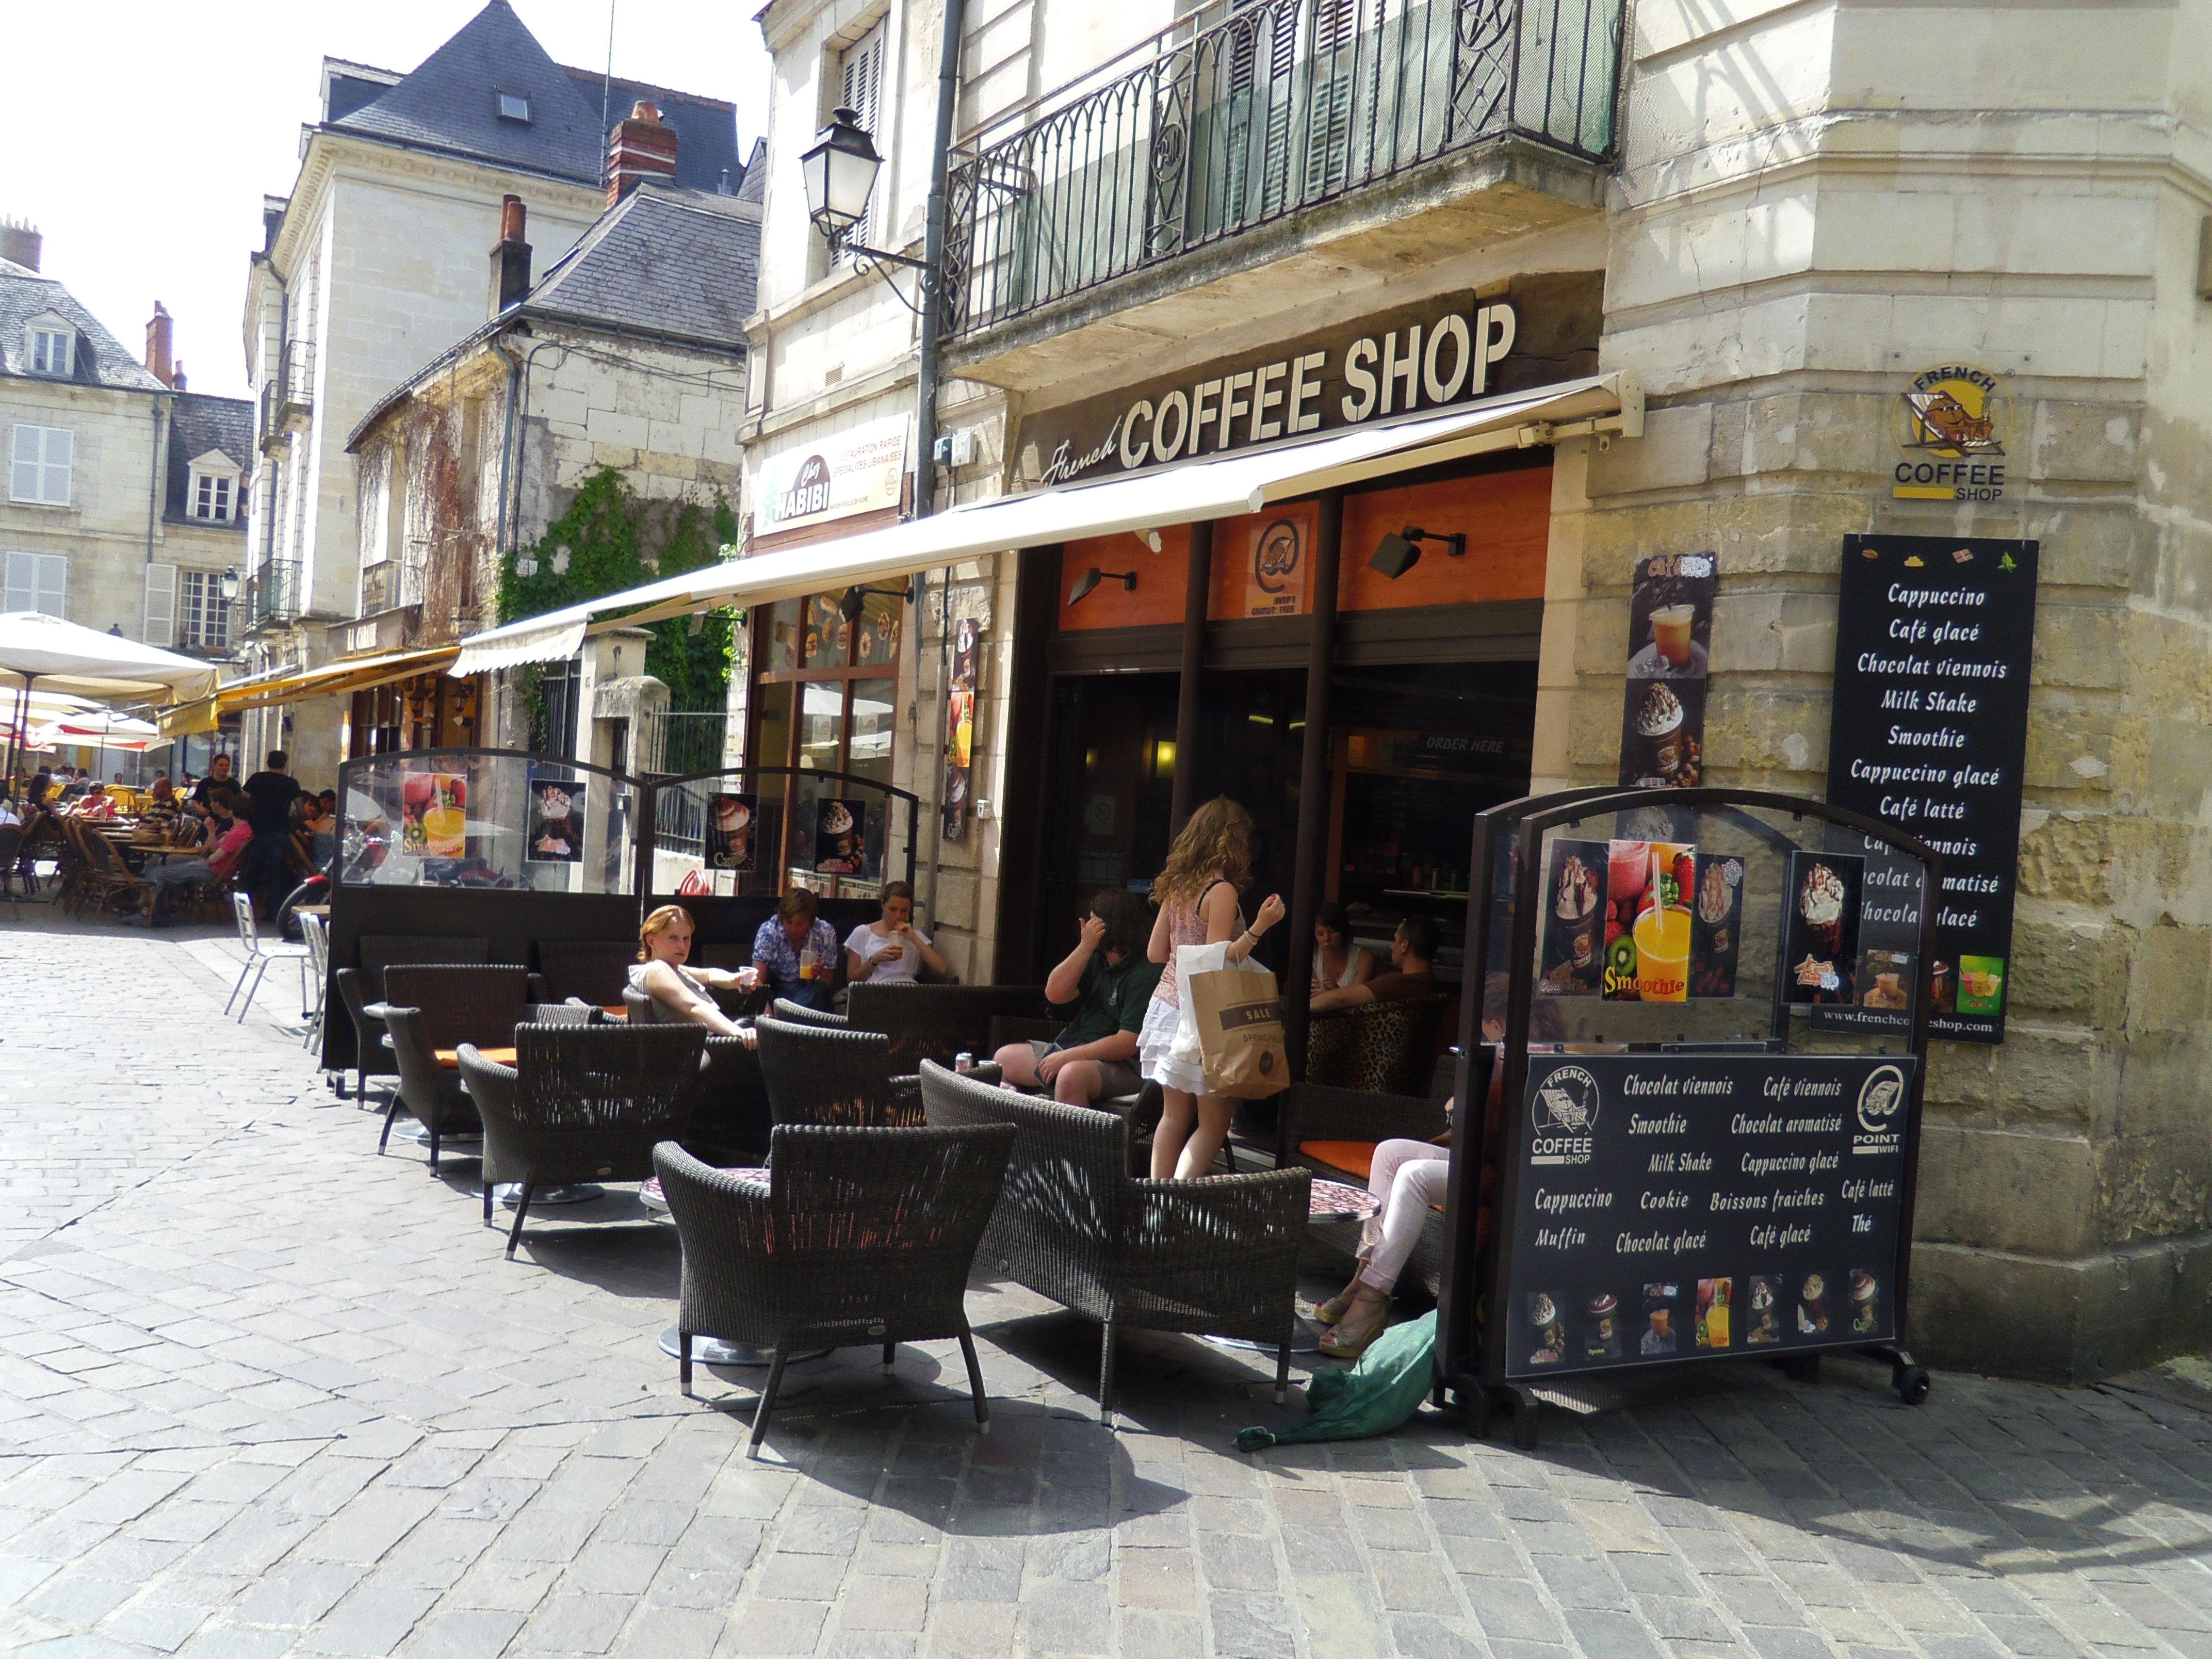 french shops in france